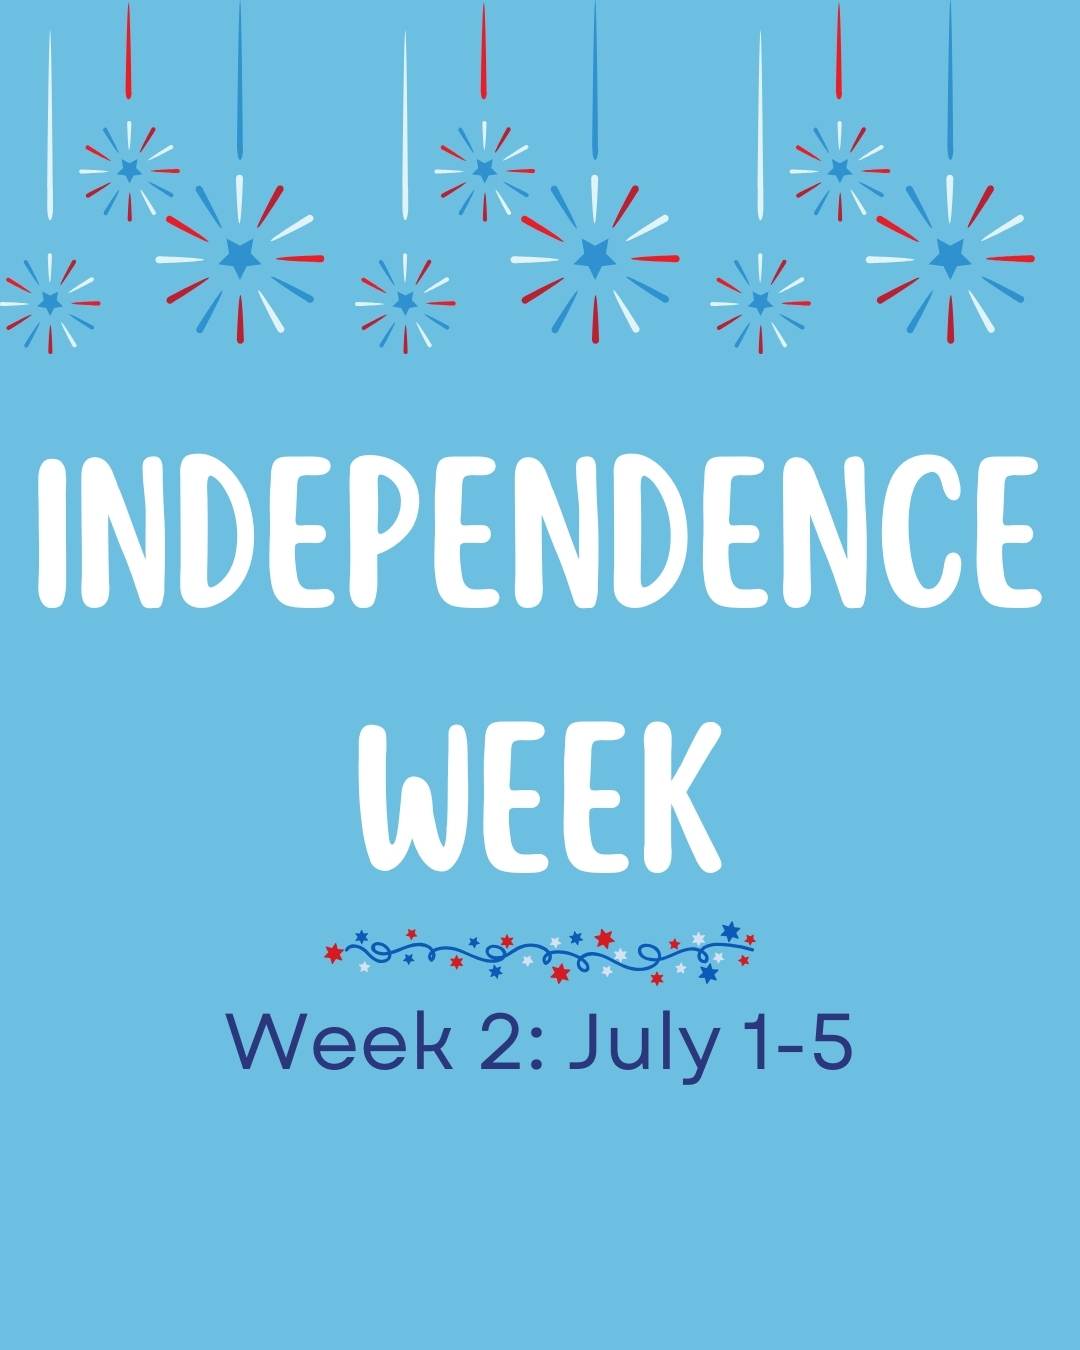 This week will be dedicated to our campers: Show Your Independence.

From tying their shoes to opening up their fruit pouches, it will be a fun week for them to learn and show us what they are able to do.